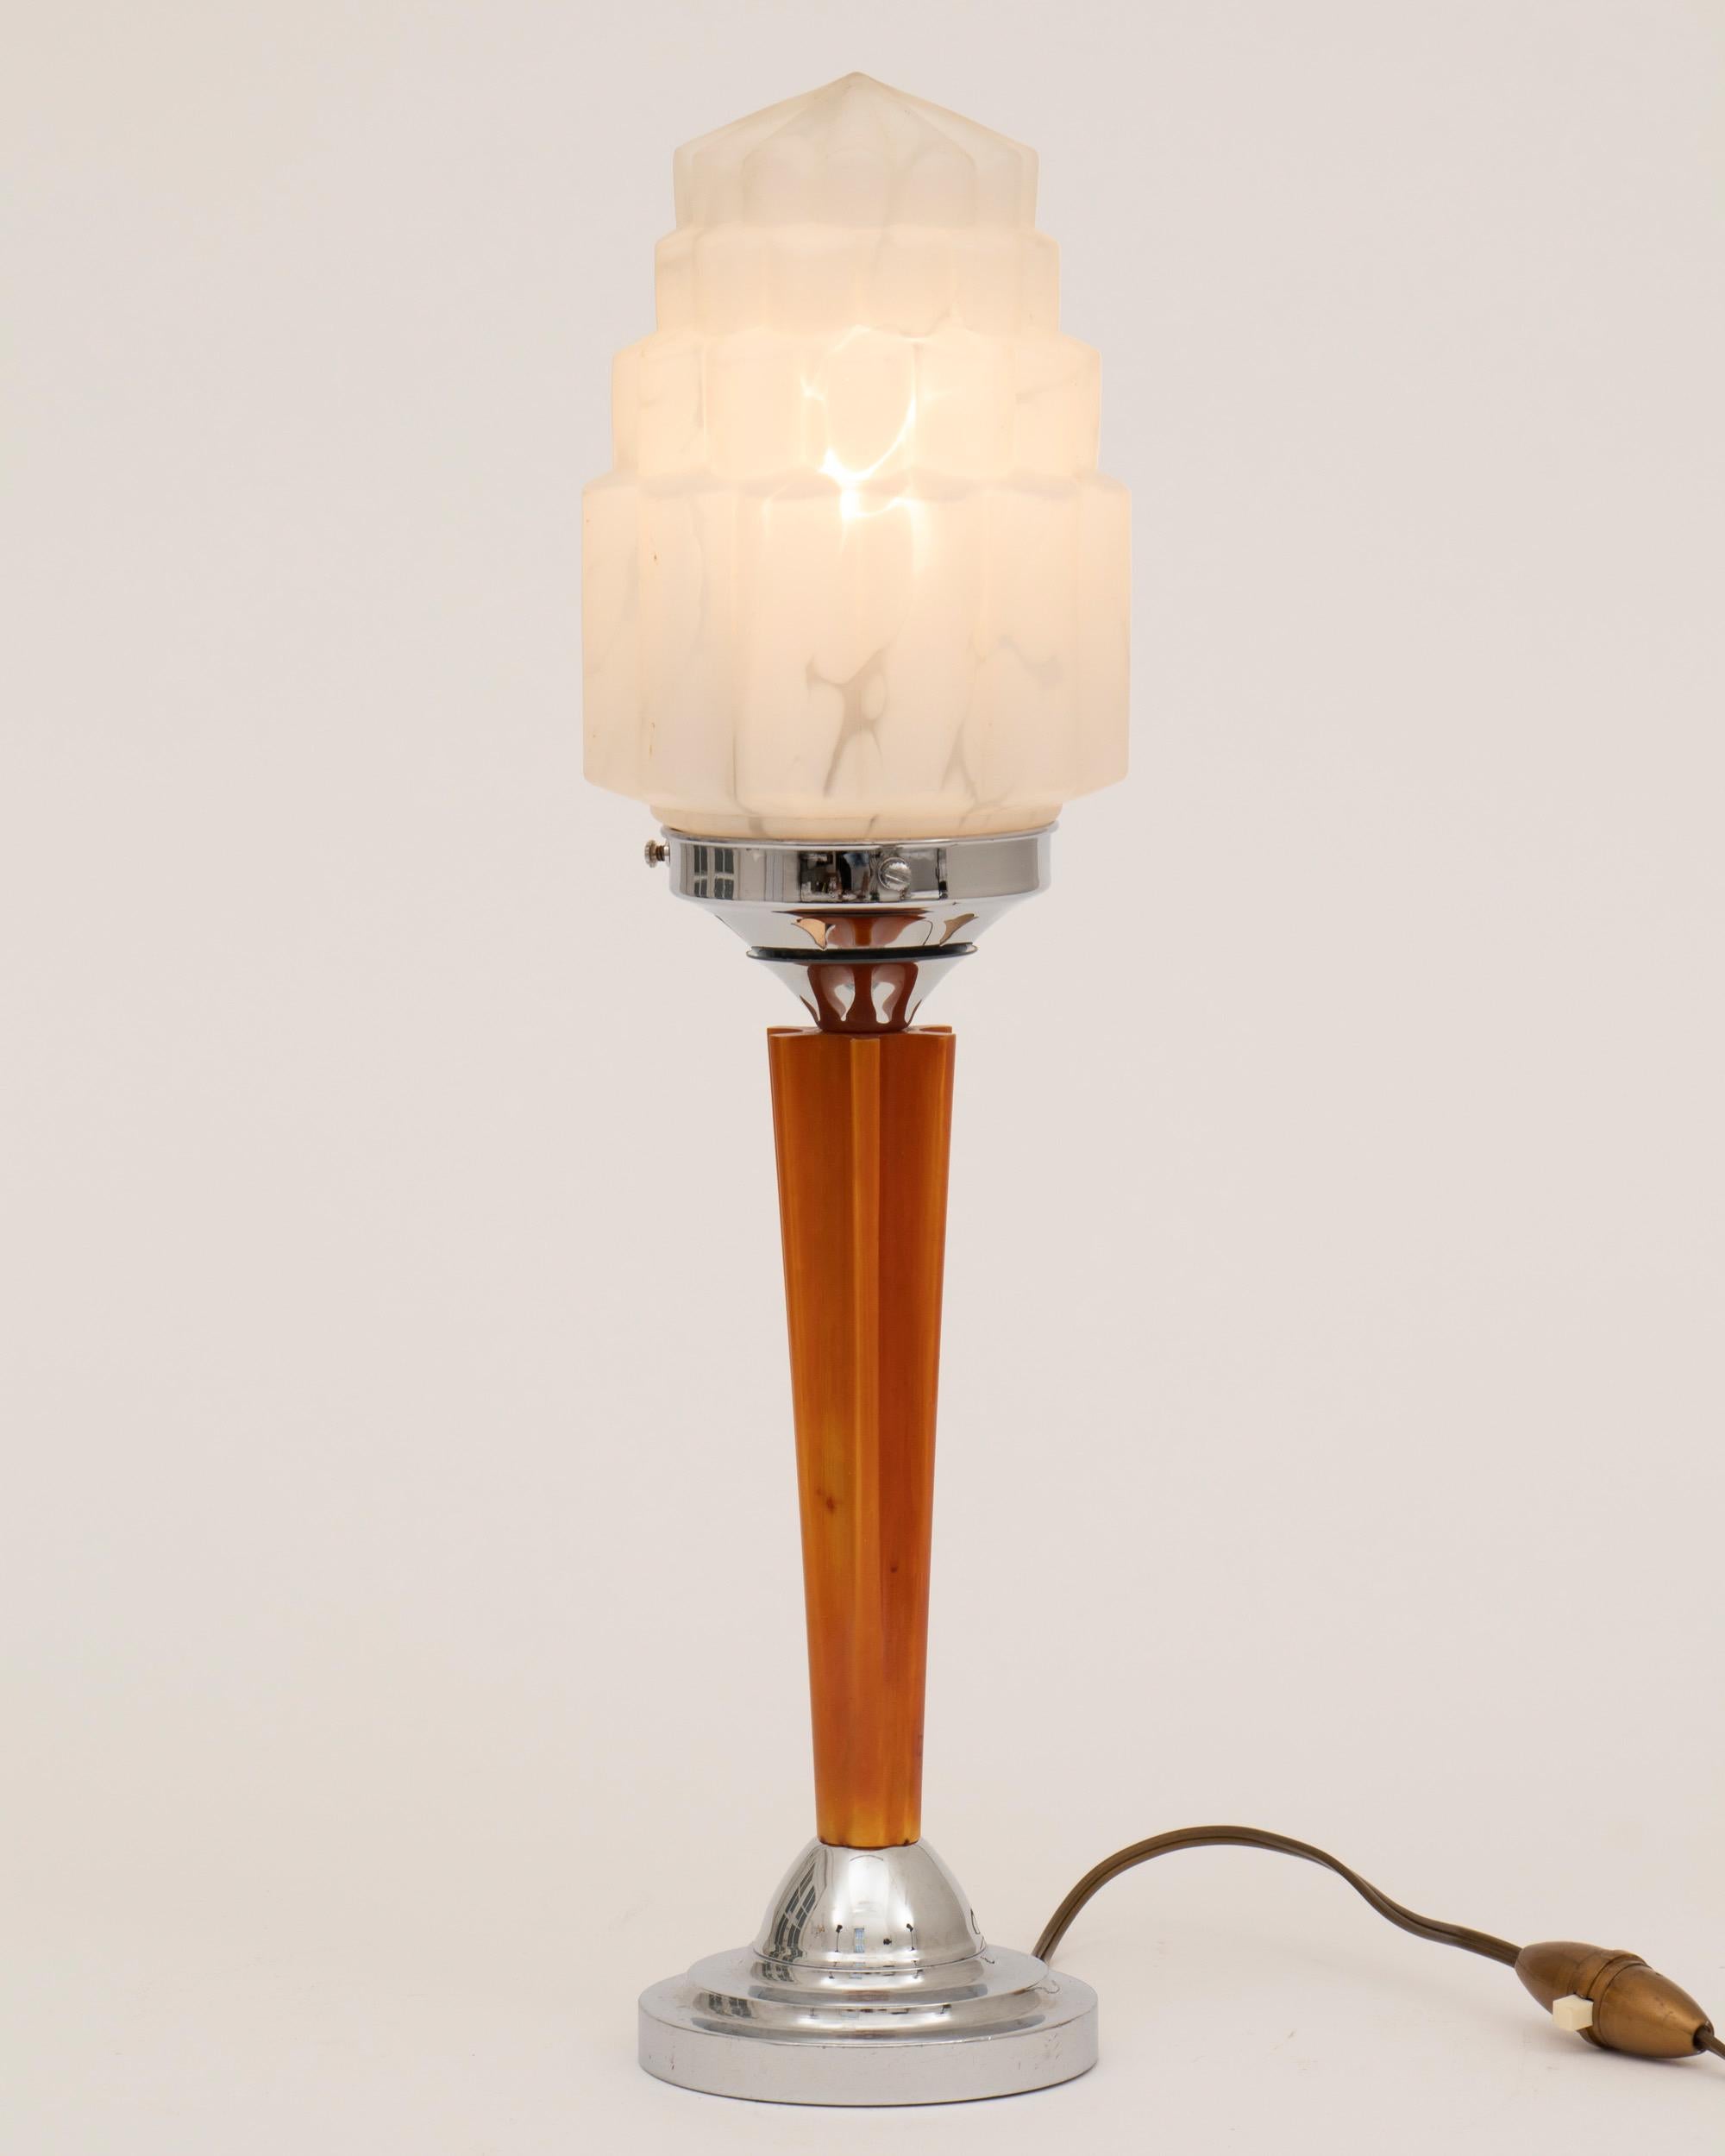 Art Deco skyscraper table lamp with fluted amber bakelite column on and polished chrome domed shape base and original marbled glass skyscraper shade. Made in Britain during the 1930s.
Measures: H 45cm, W 12cm, D 12cm.